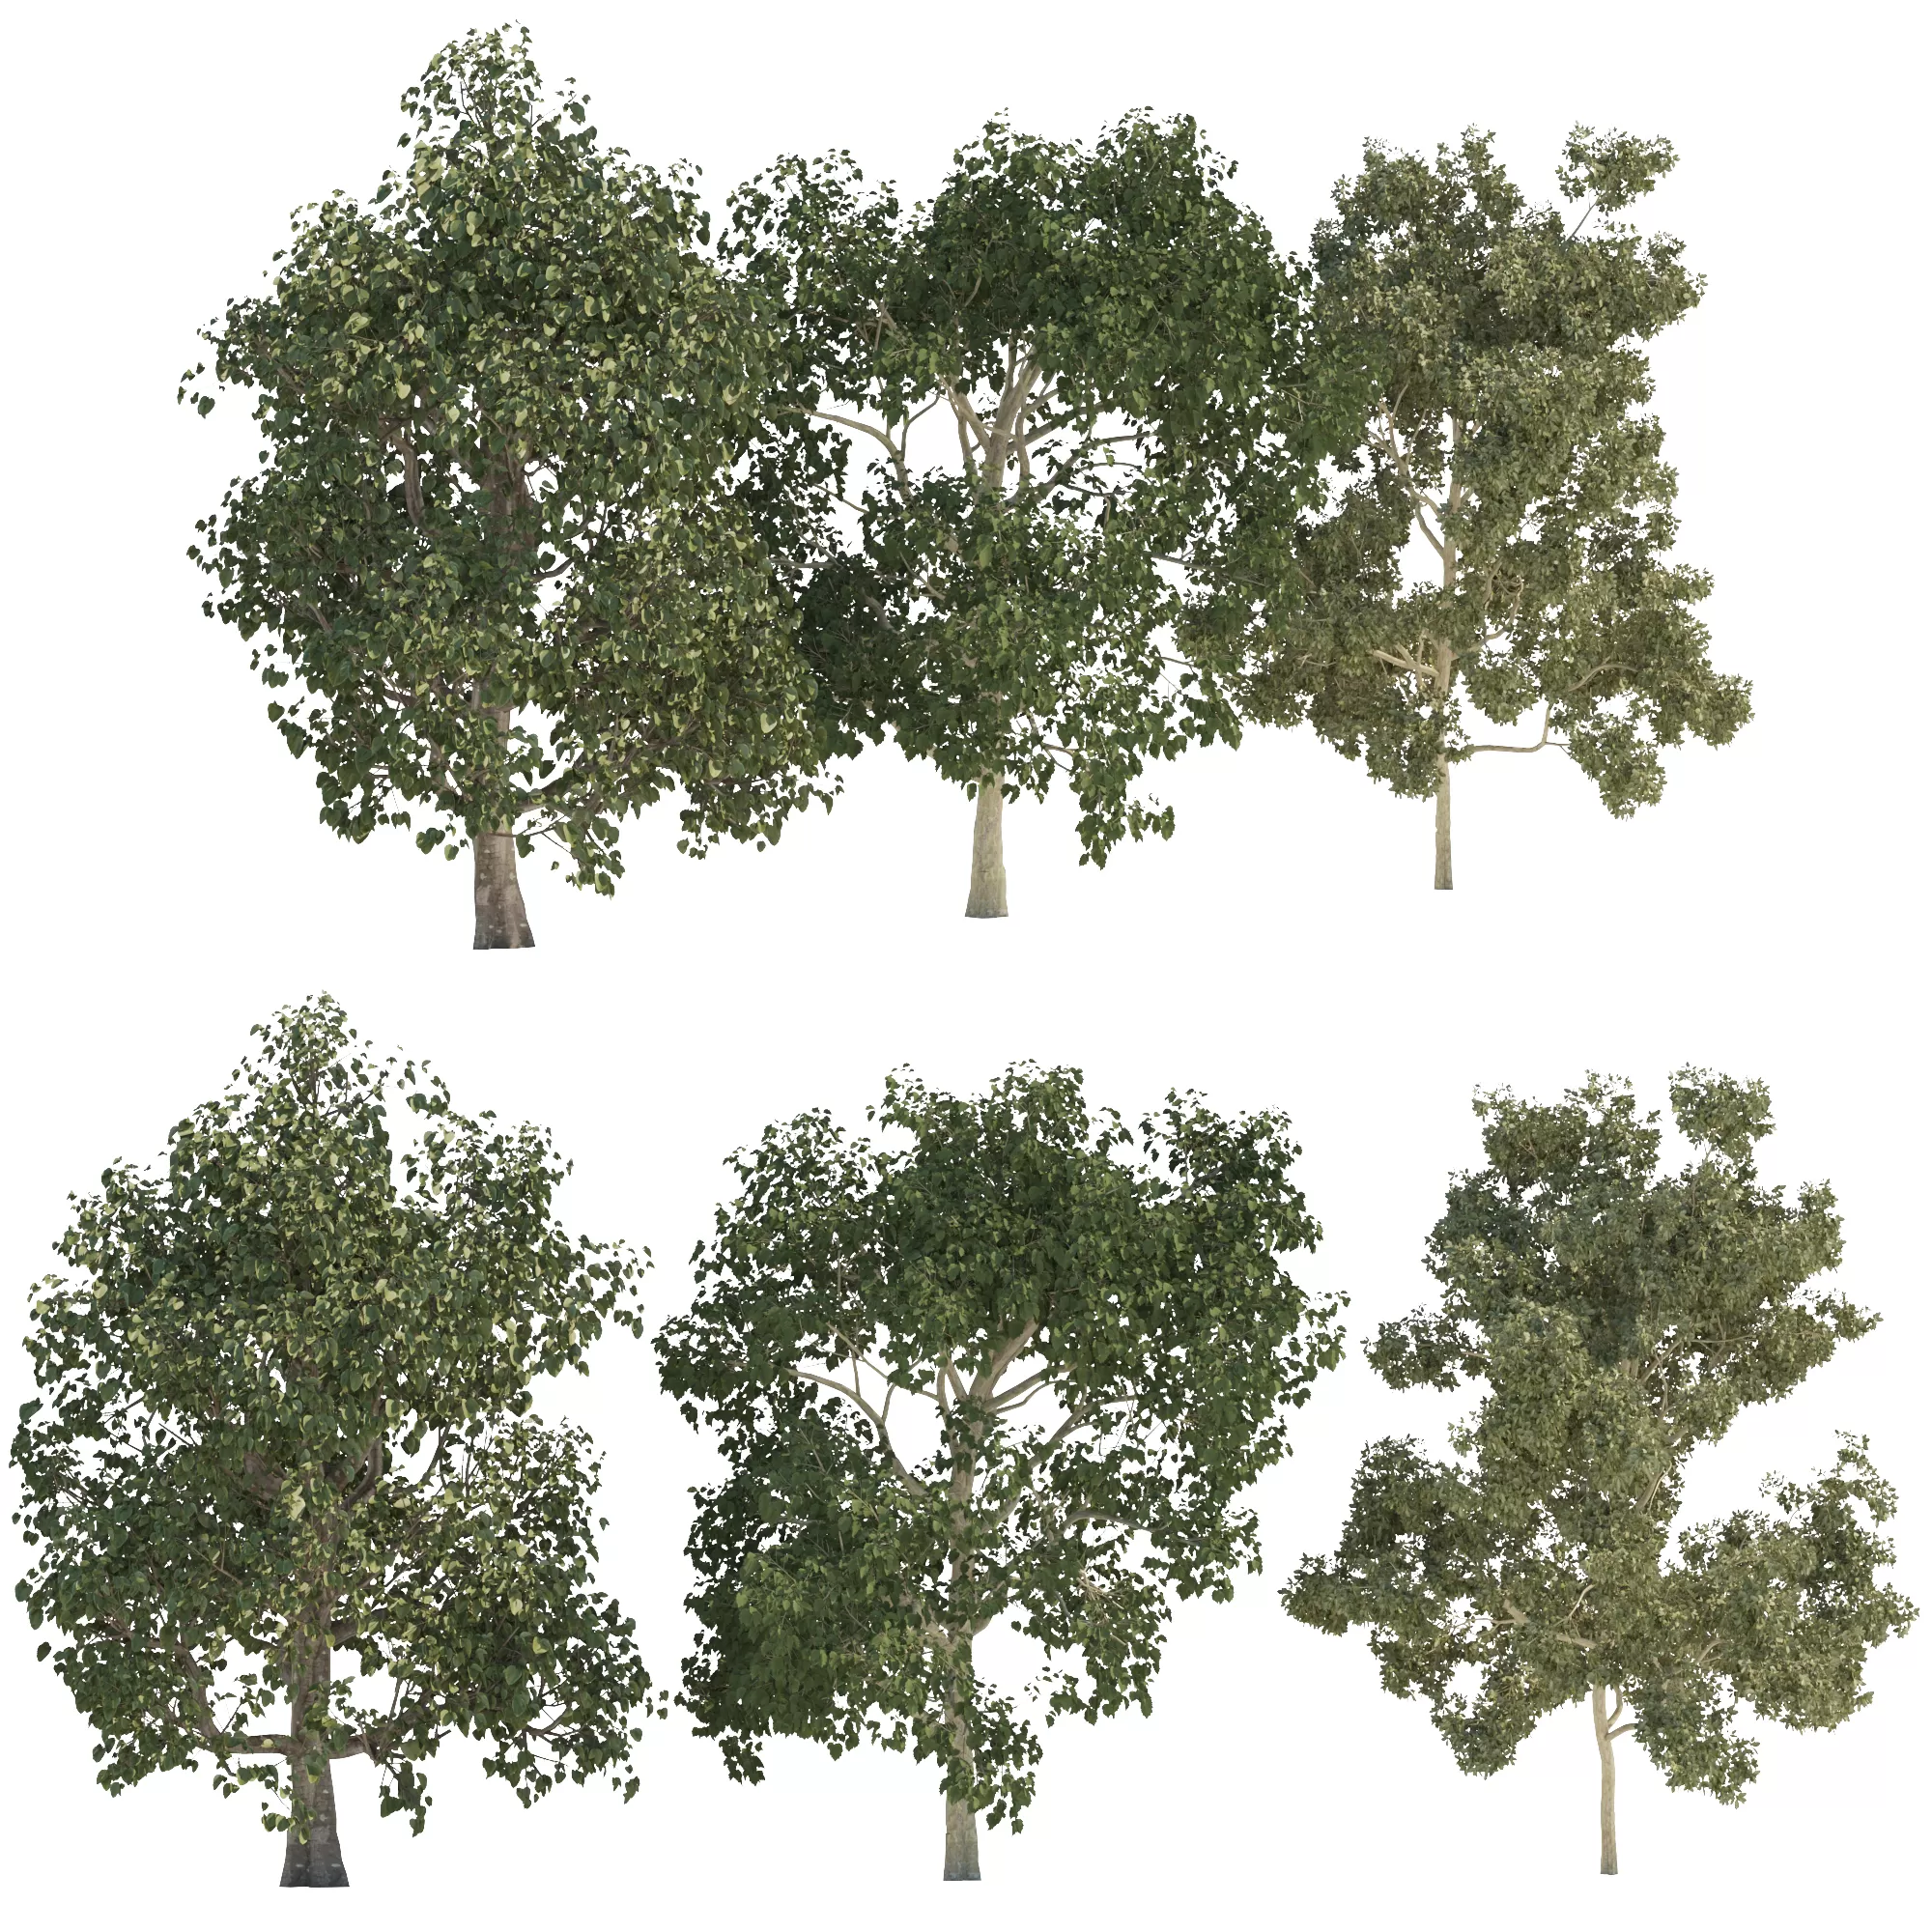 Three trees with height 6000 mm – 6567